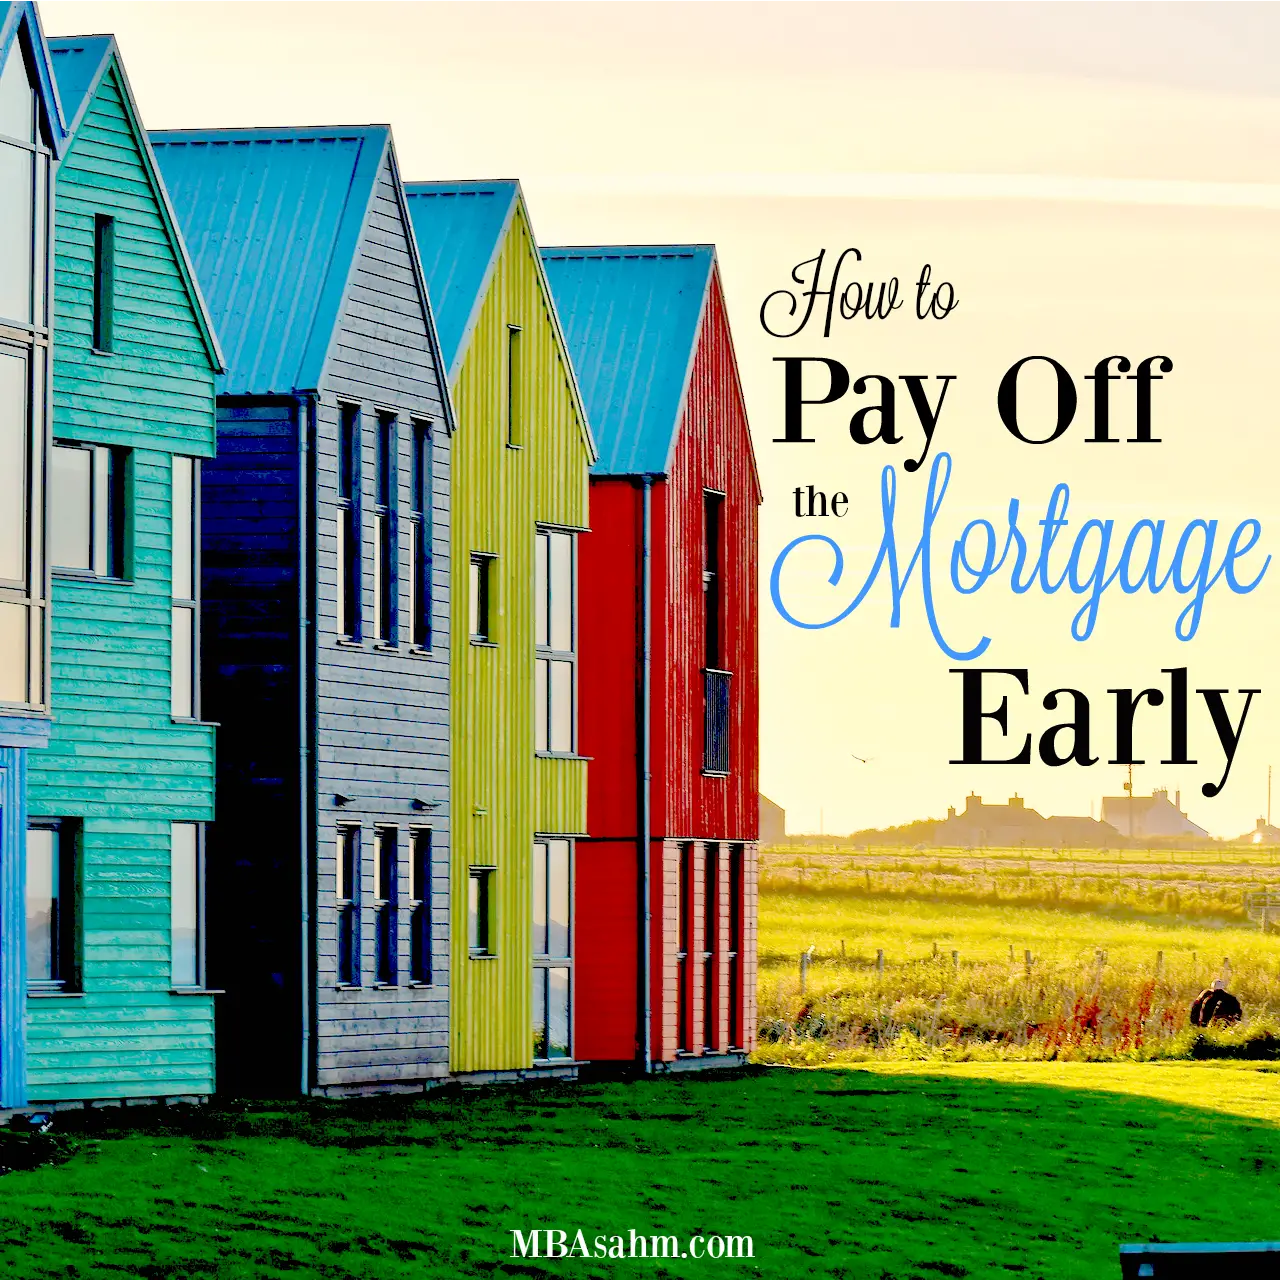 Thinking about paying off your mortgage? Now